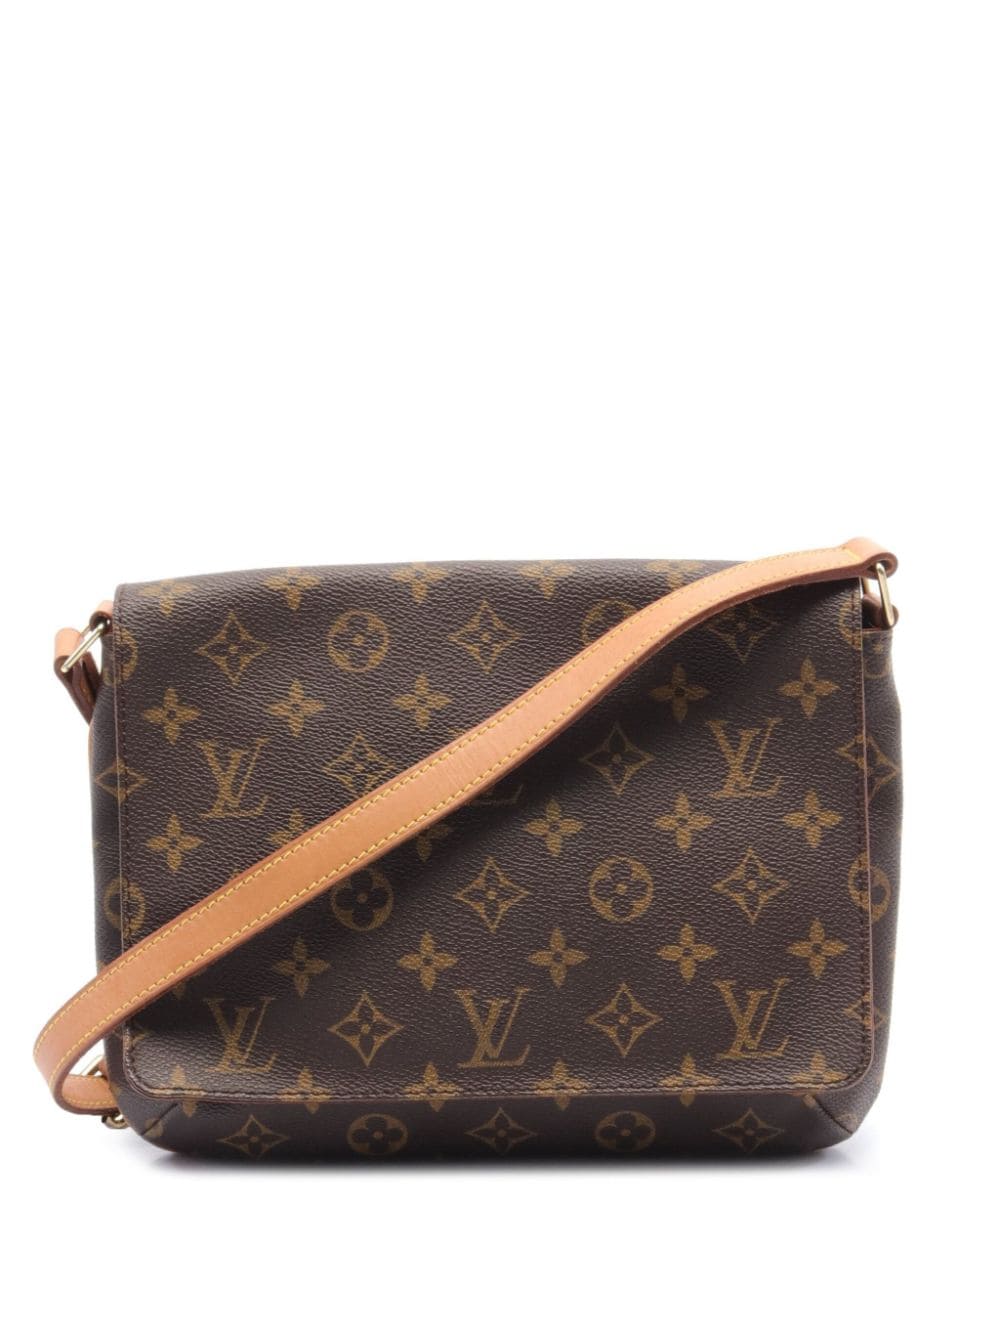 Pre-owned Louis Vuitton 1999 Musette Tango Shoulder Bag In Brown